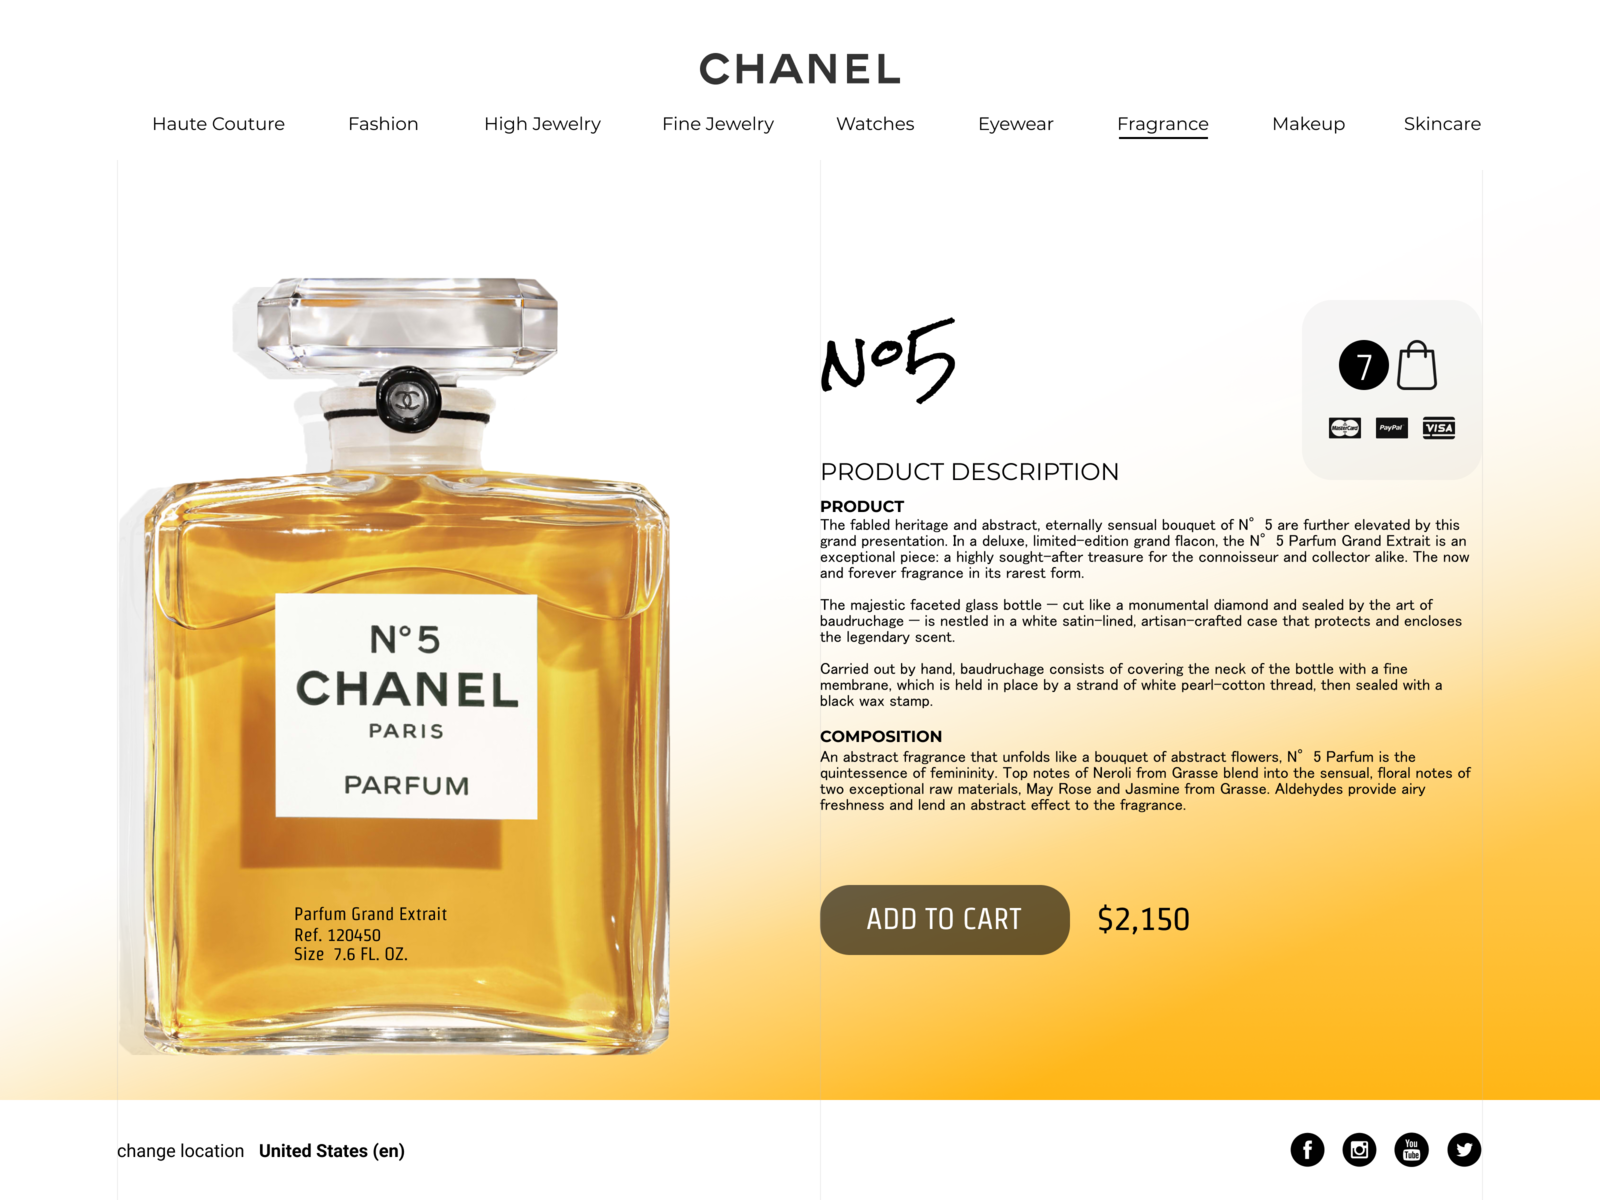 chanel number 5 perfume